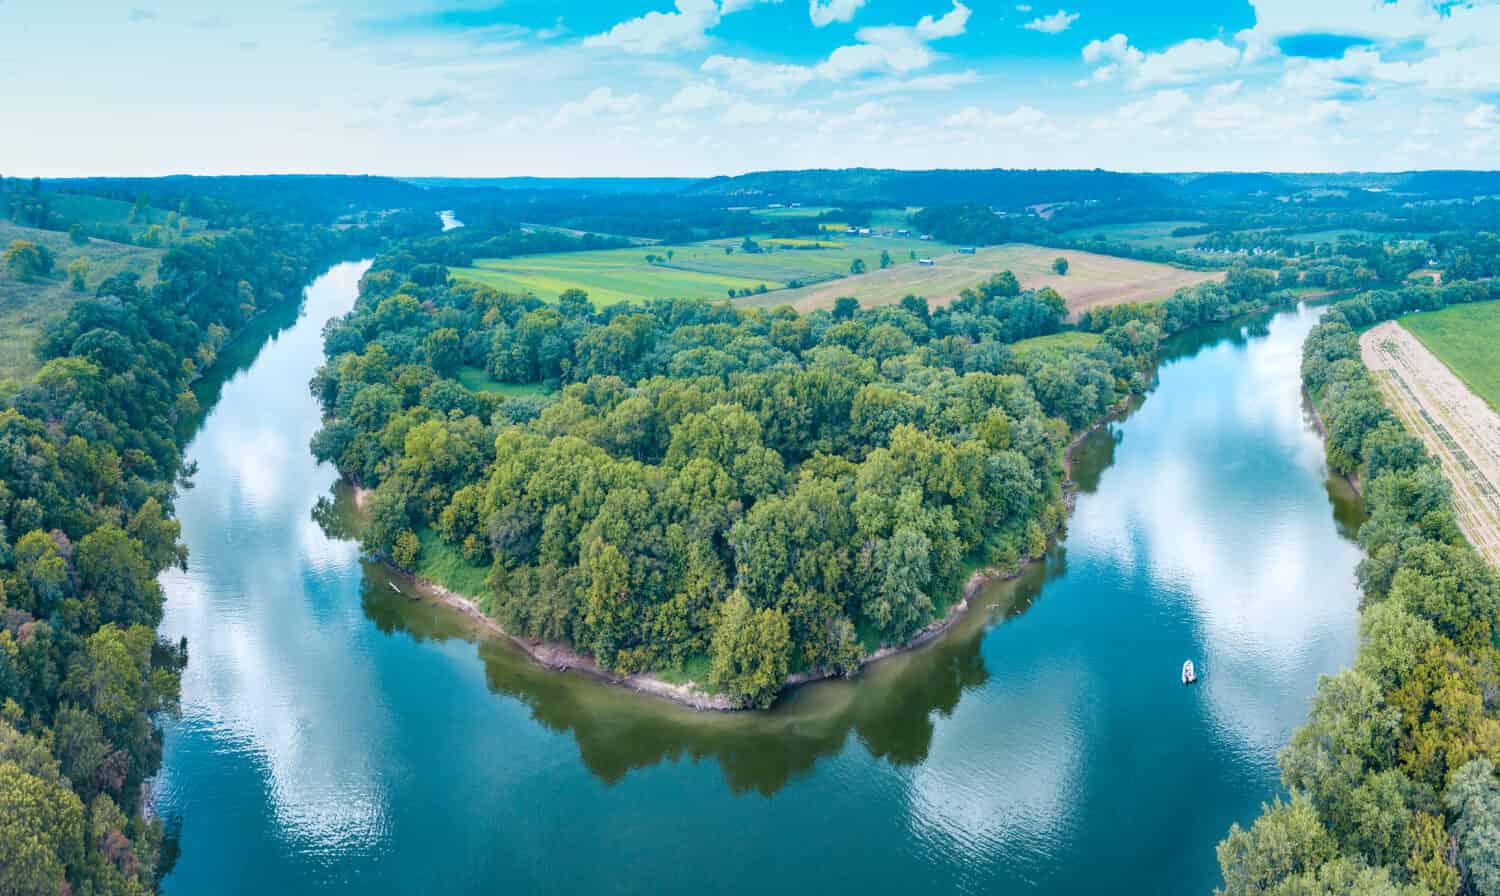 An aerial view panorama of lush forestry and bending Kentucky river with a boat on the water and cloud reflections in the sky.